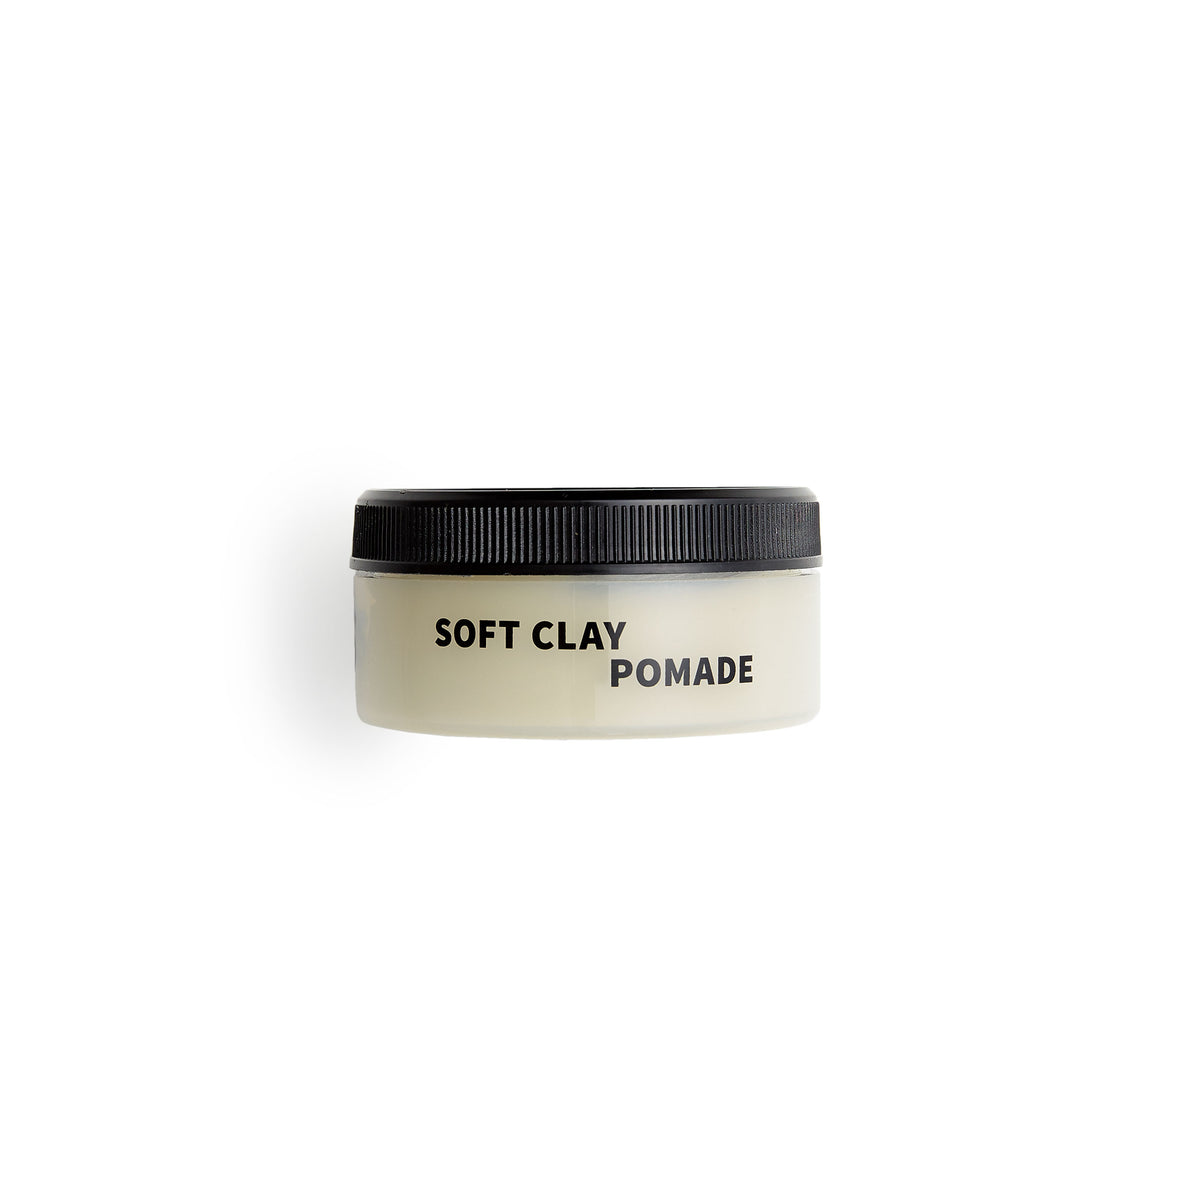 Image of Soft Clay Pomade on white background